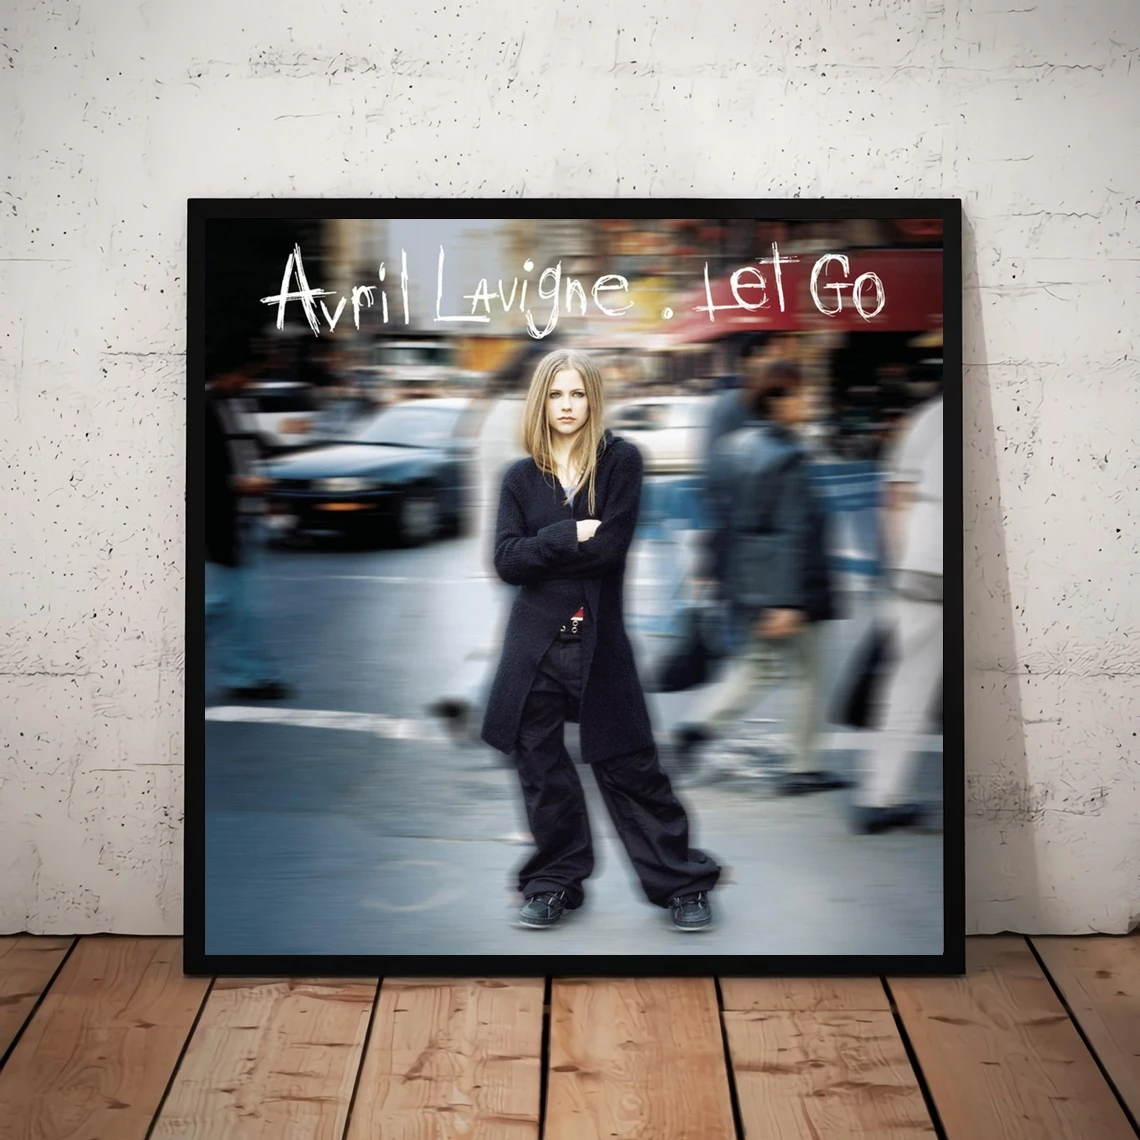 

Avril Lavigne Let Go Music Album Cover Poster Canvas Art Print Home Decoration Wall Painting ( No Frame )